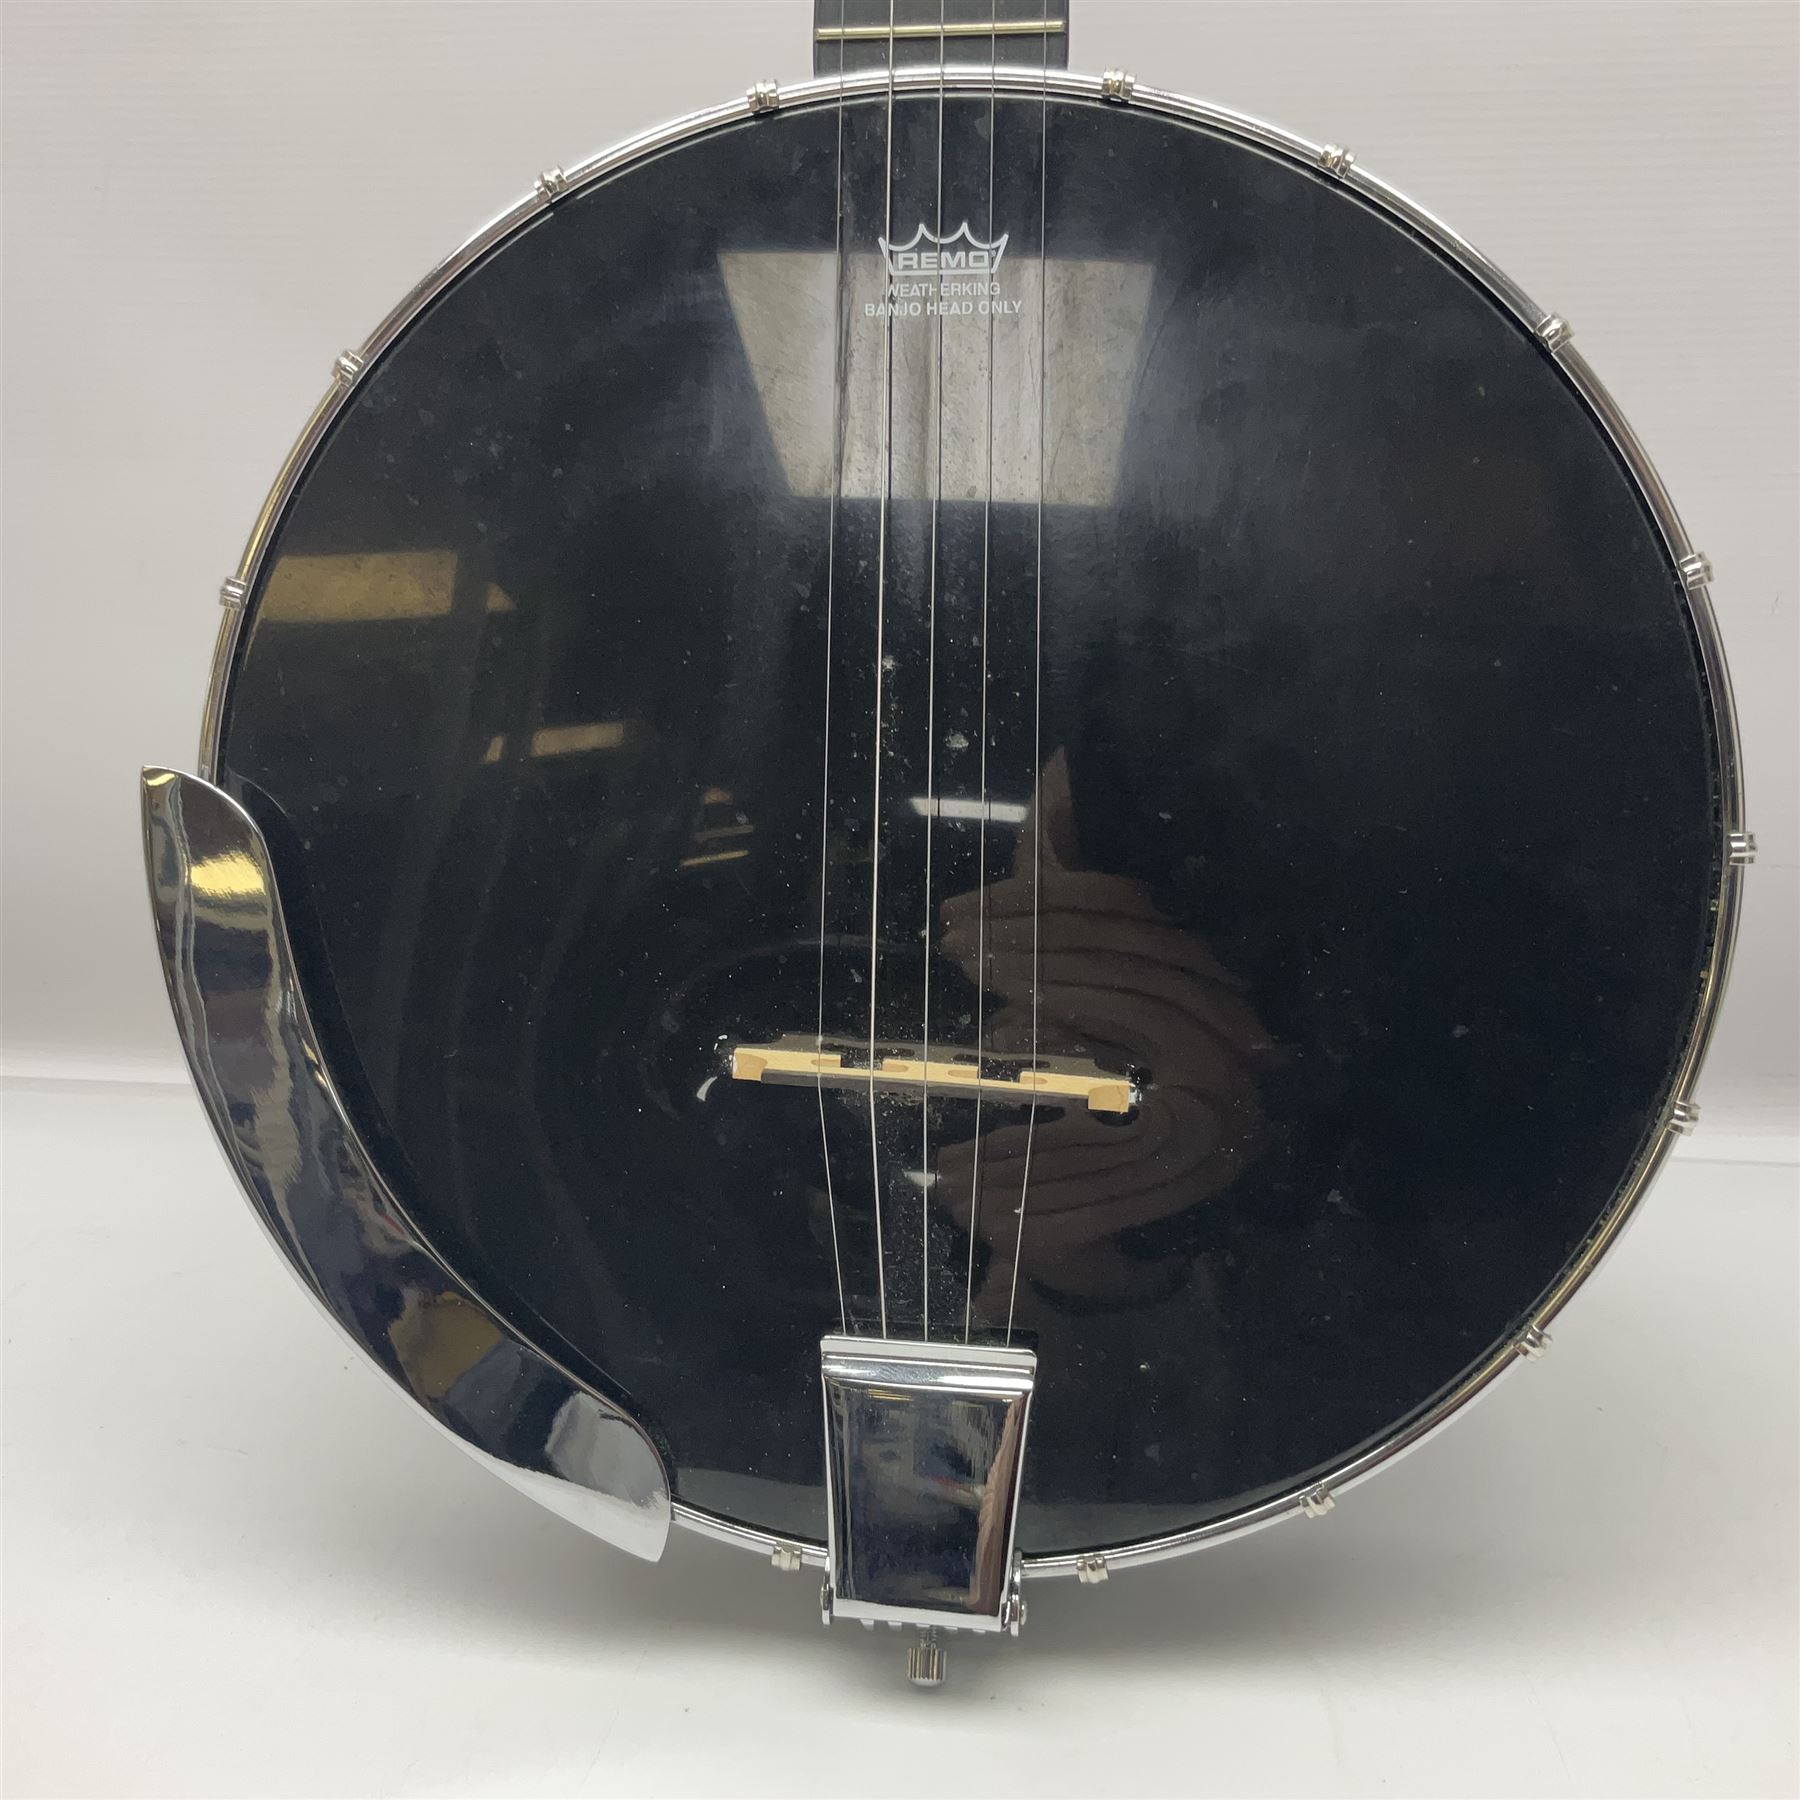 Stagg 5-string banjo L97.5cm; in soft carrying case - Image 2 of 20